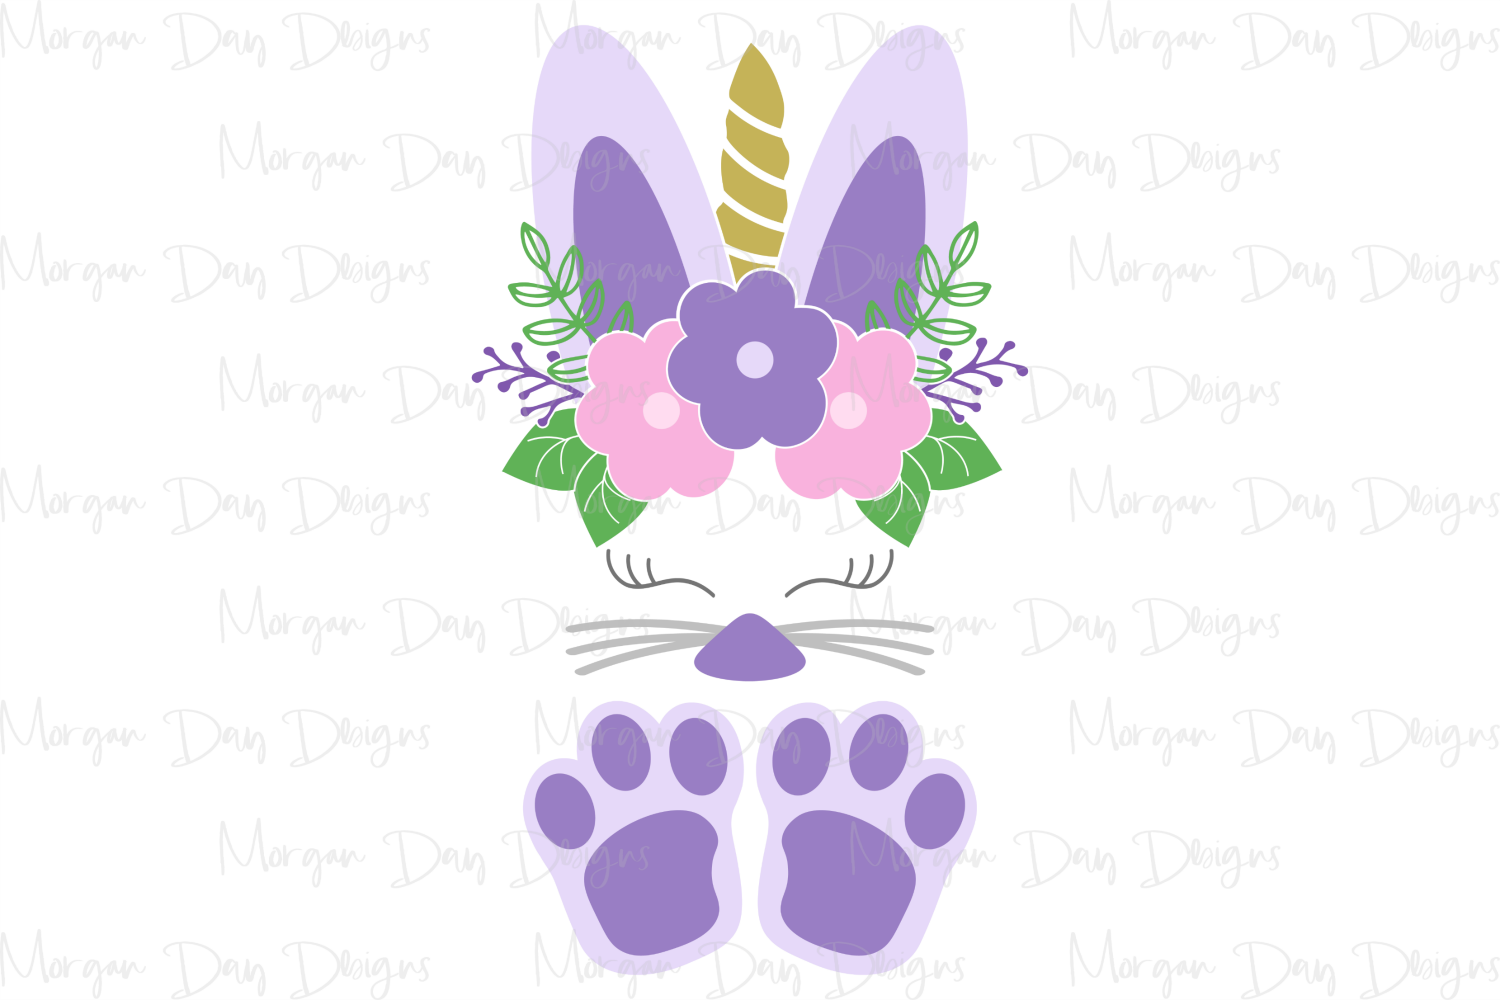 Download Unicorn - Bunny - Easter SVG, DXF, AI, EPS, PNG, JPEG